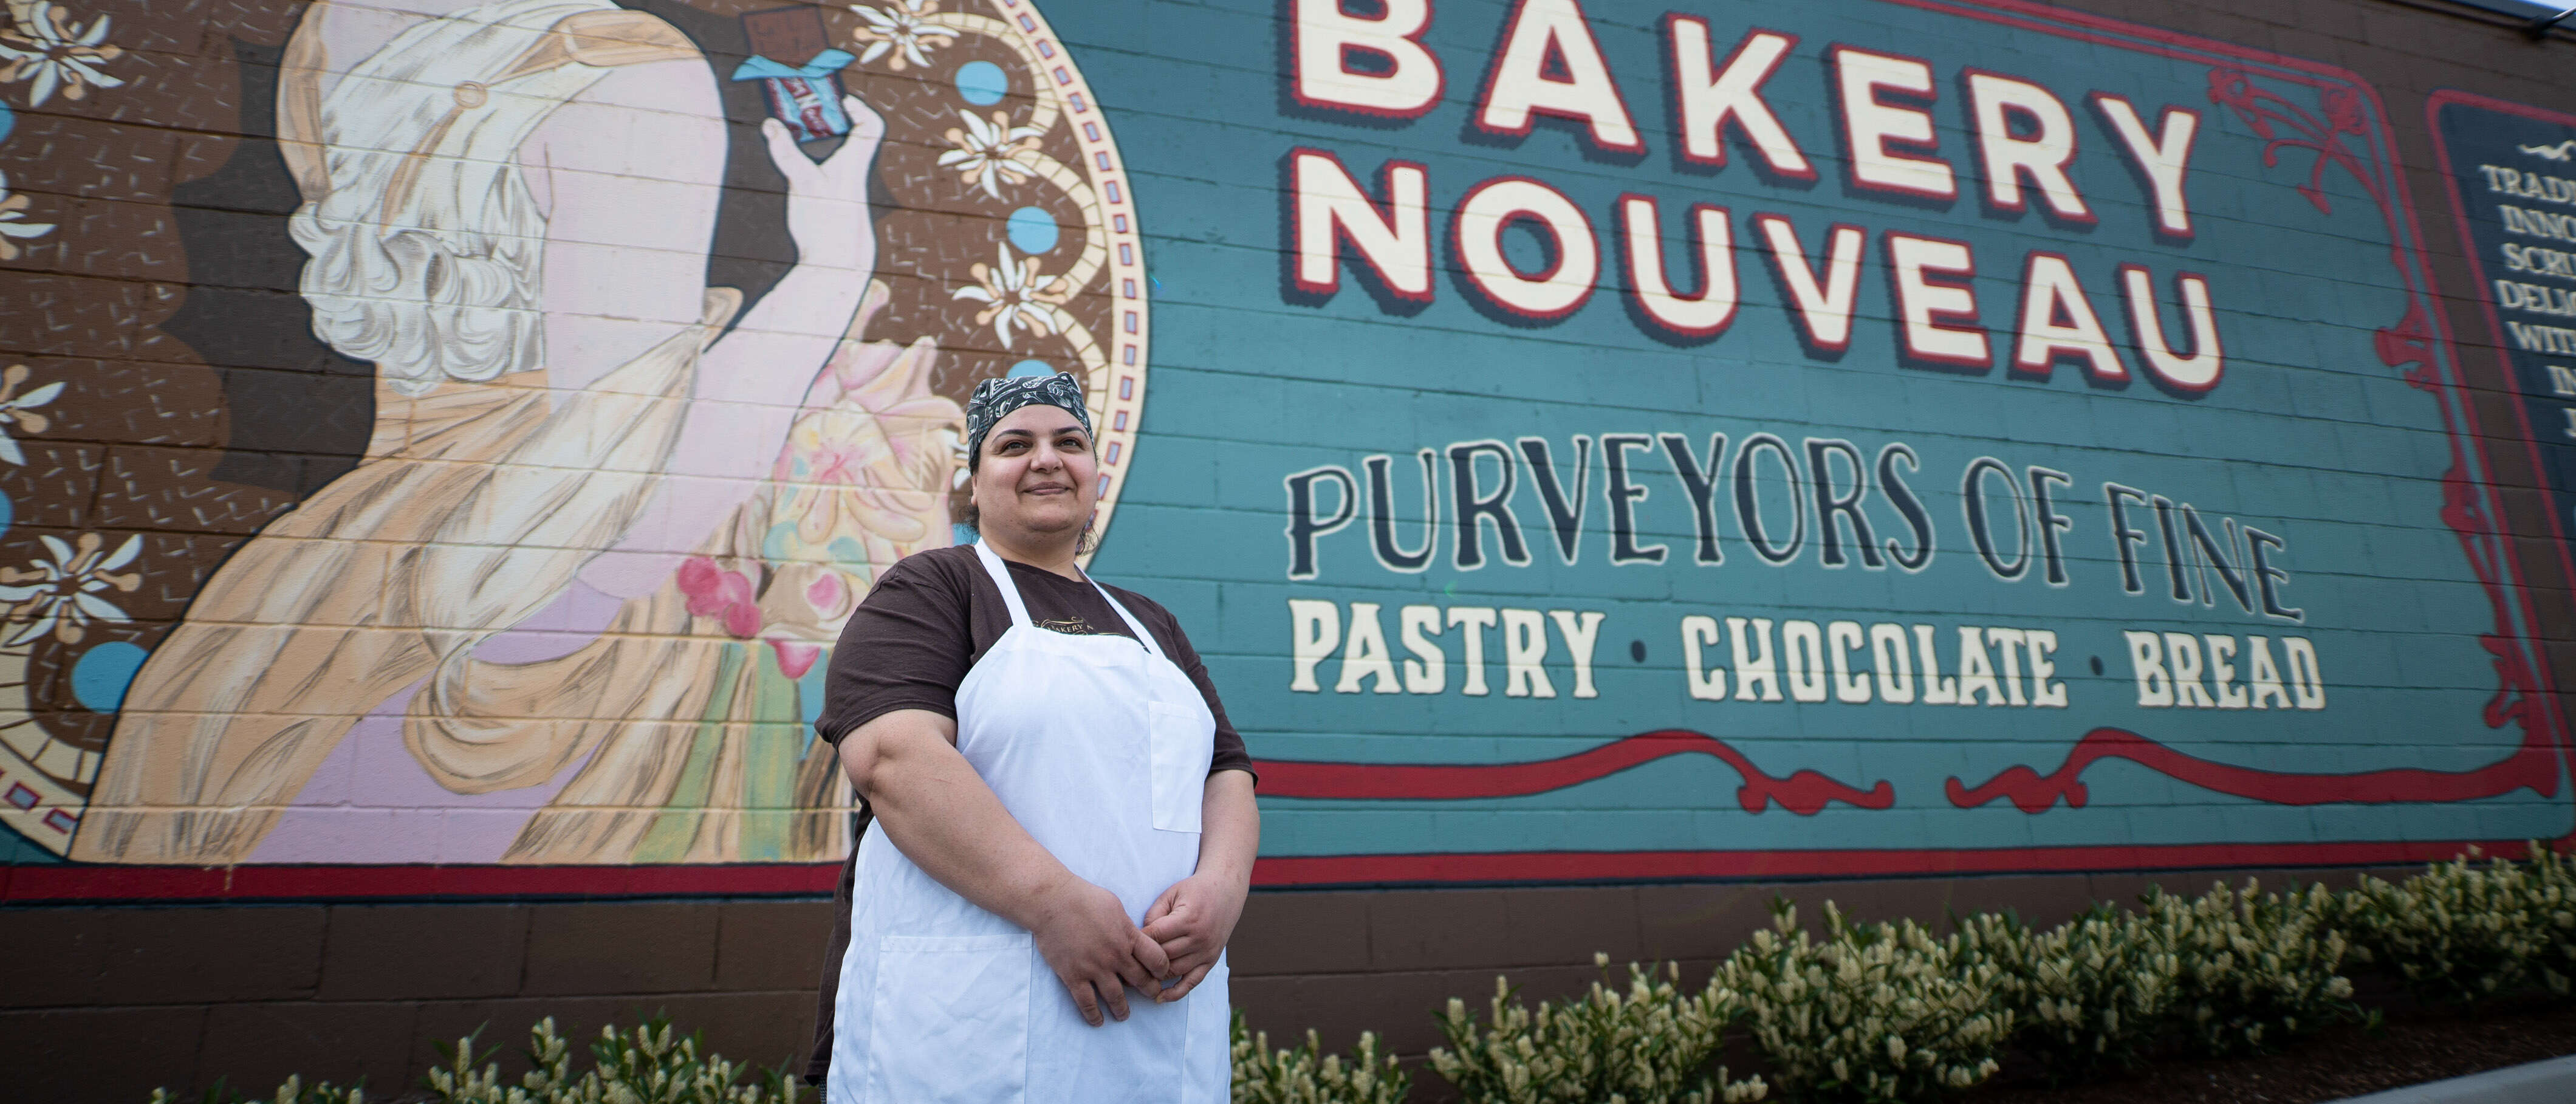 A woman stands by a mural on the side of a bakery and poses for a photo.